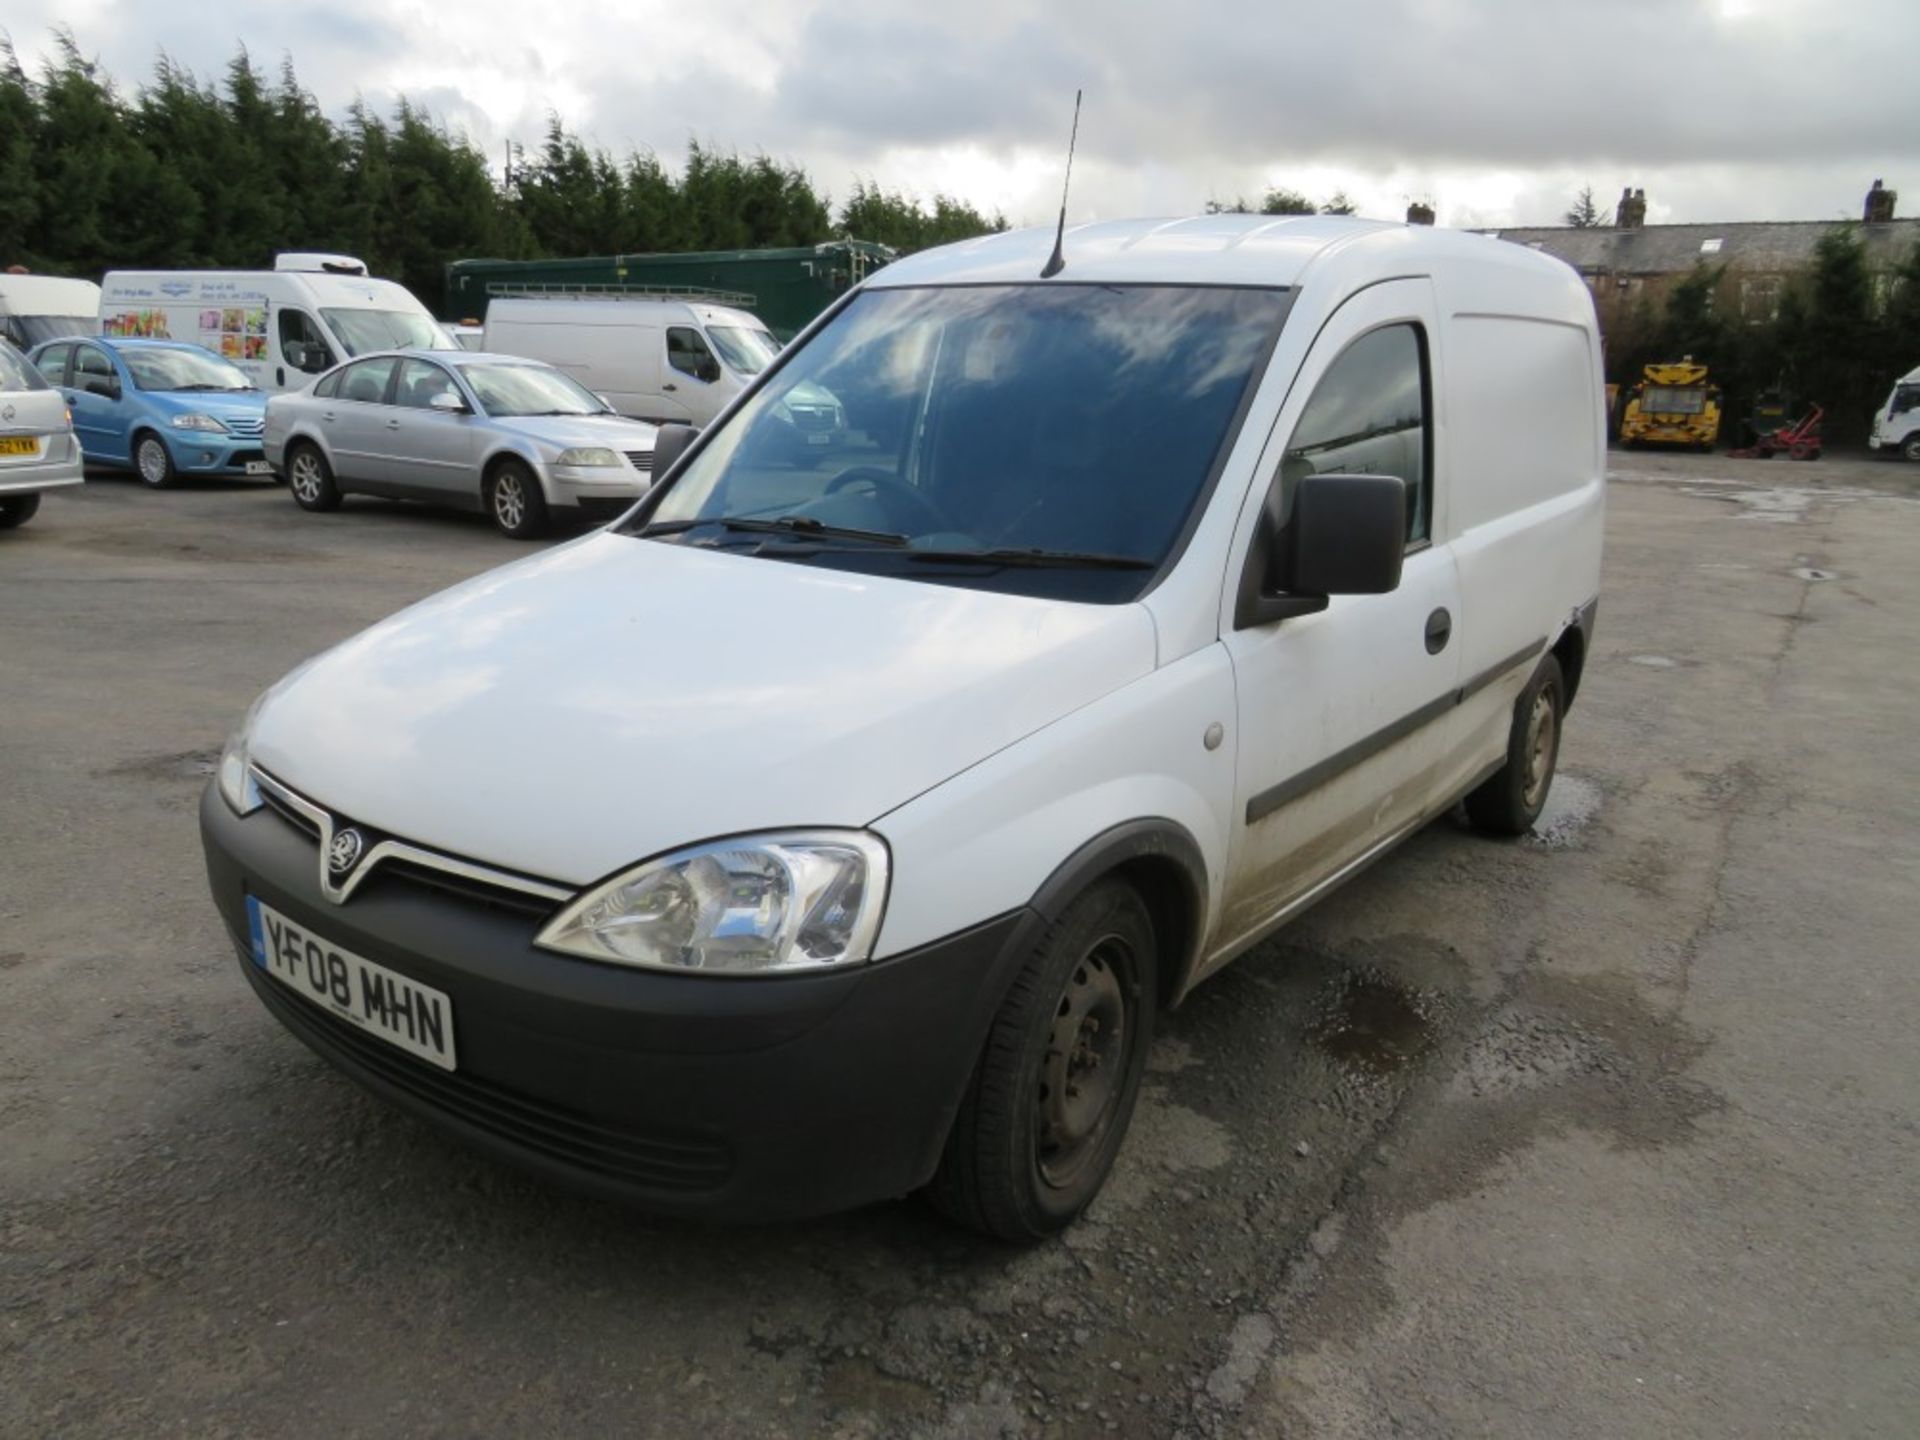 08 reg VAUXHALL COMBO 1700 CDTI, 1ST REG 04/08, TEST 05/20, 181171M, V5 HERE, 3 FORMER KEEPERS [NO - Image 2 of 6